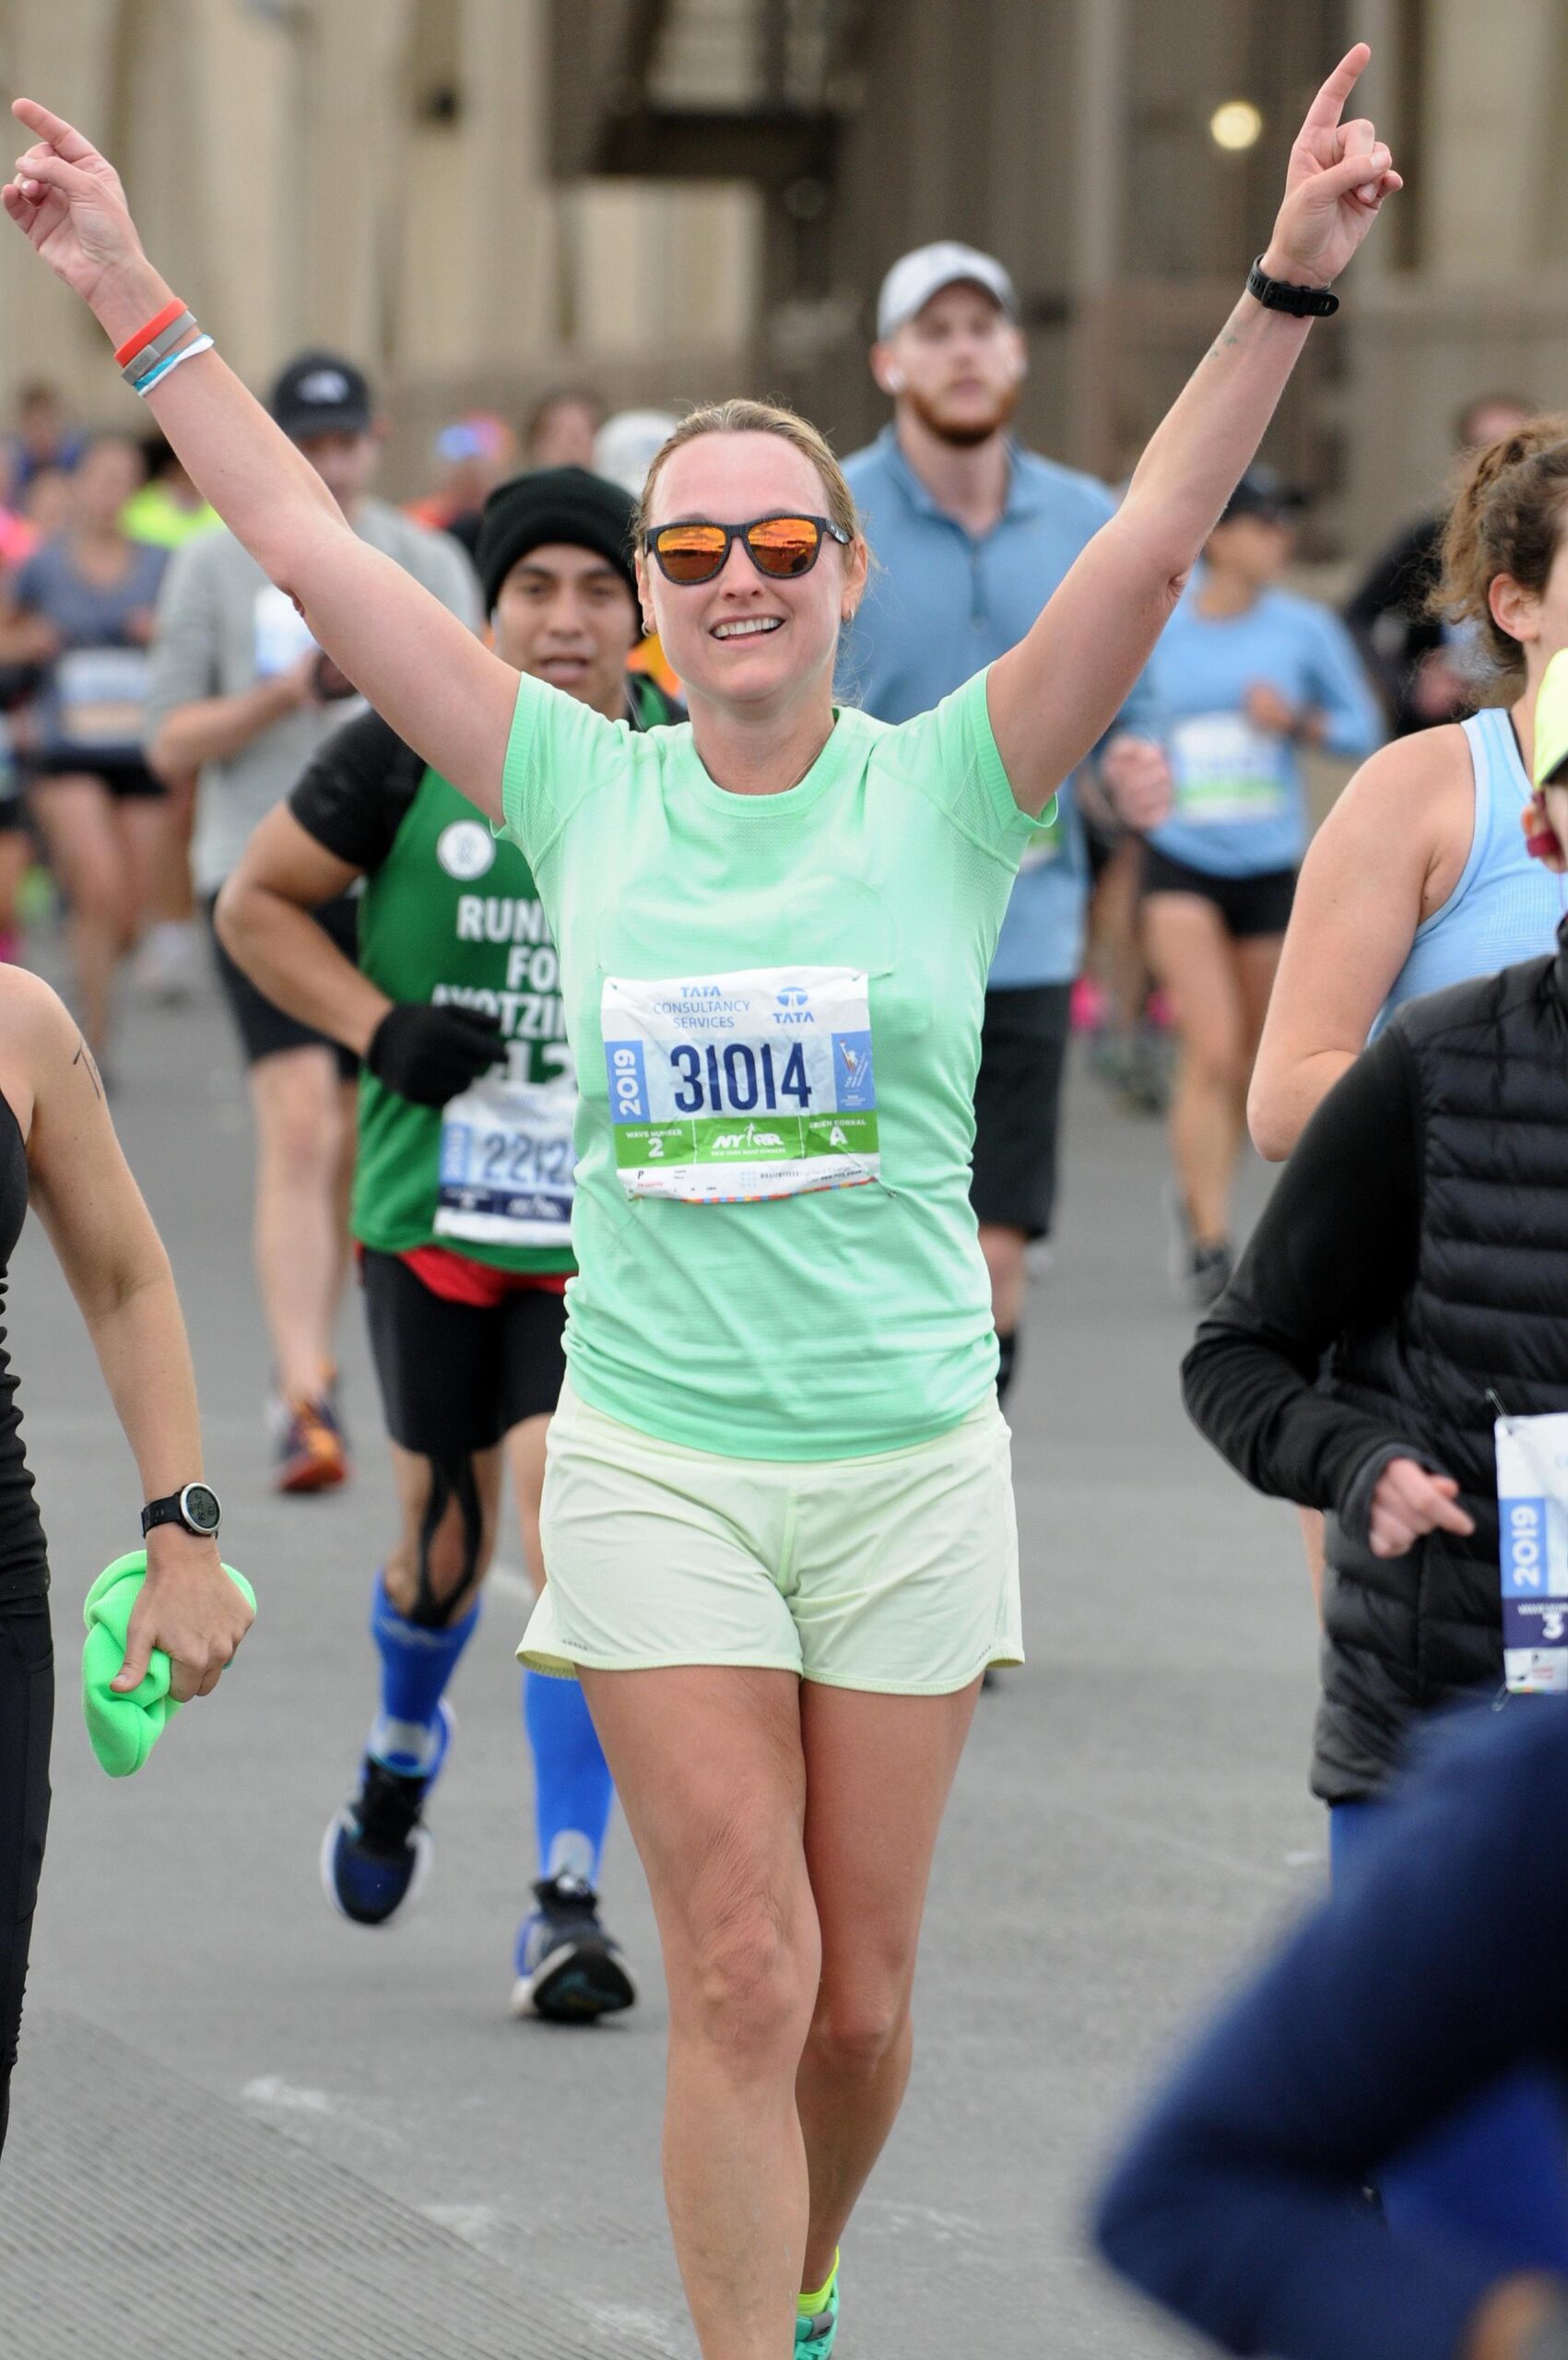 Perry runs Boston for eHop as she completes ‘Big Six’